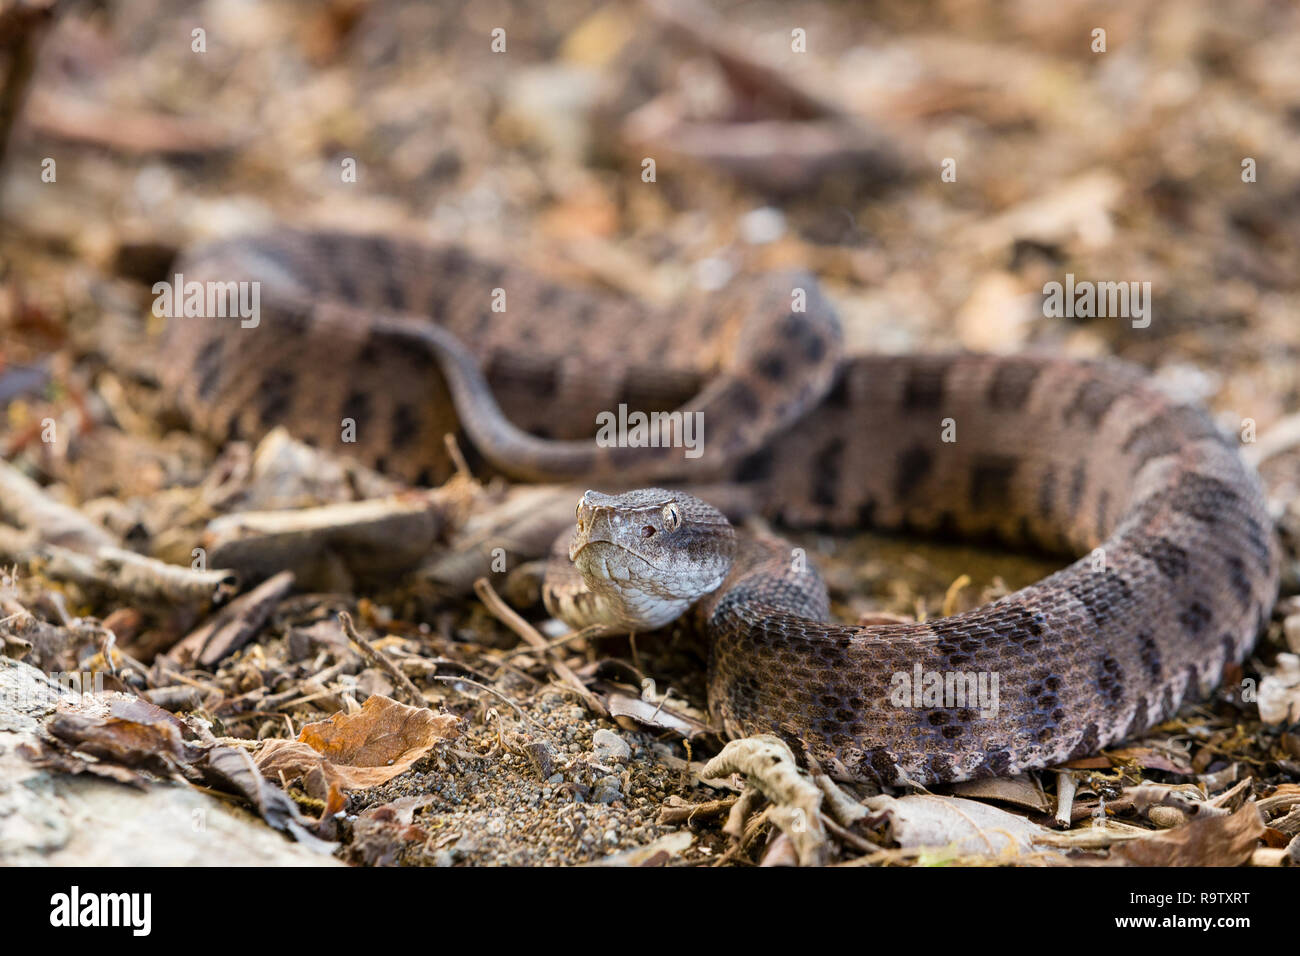 Neotropical rattlesnake in Arenal, Costa Rica Stock Photo